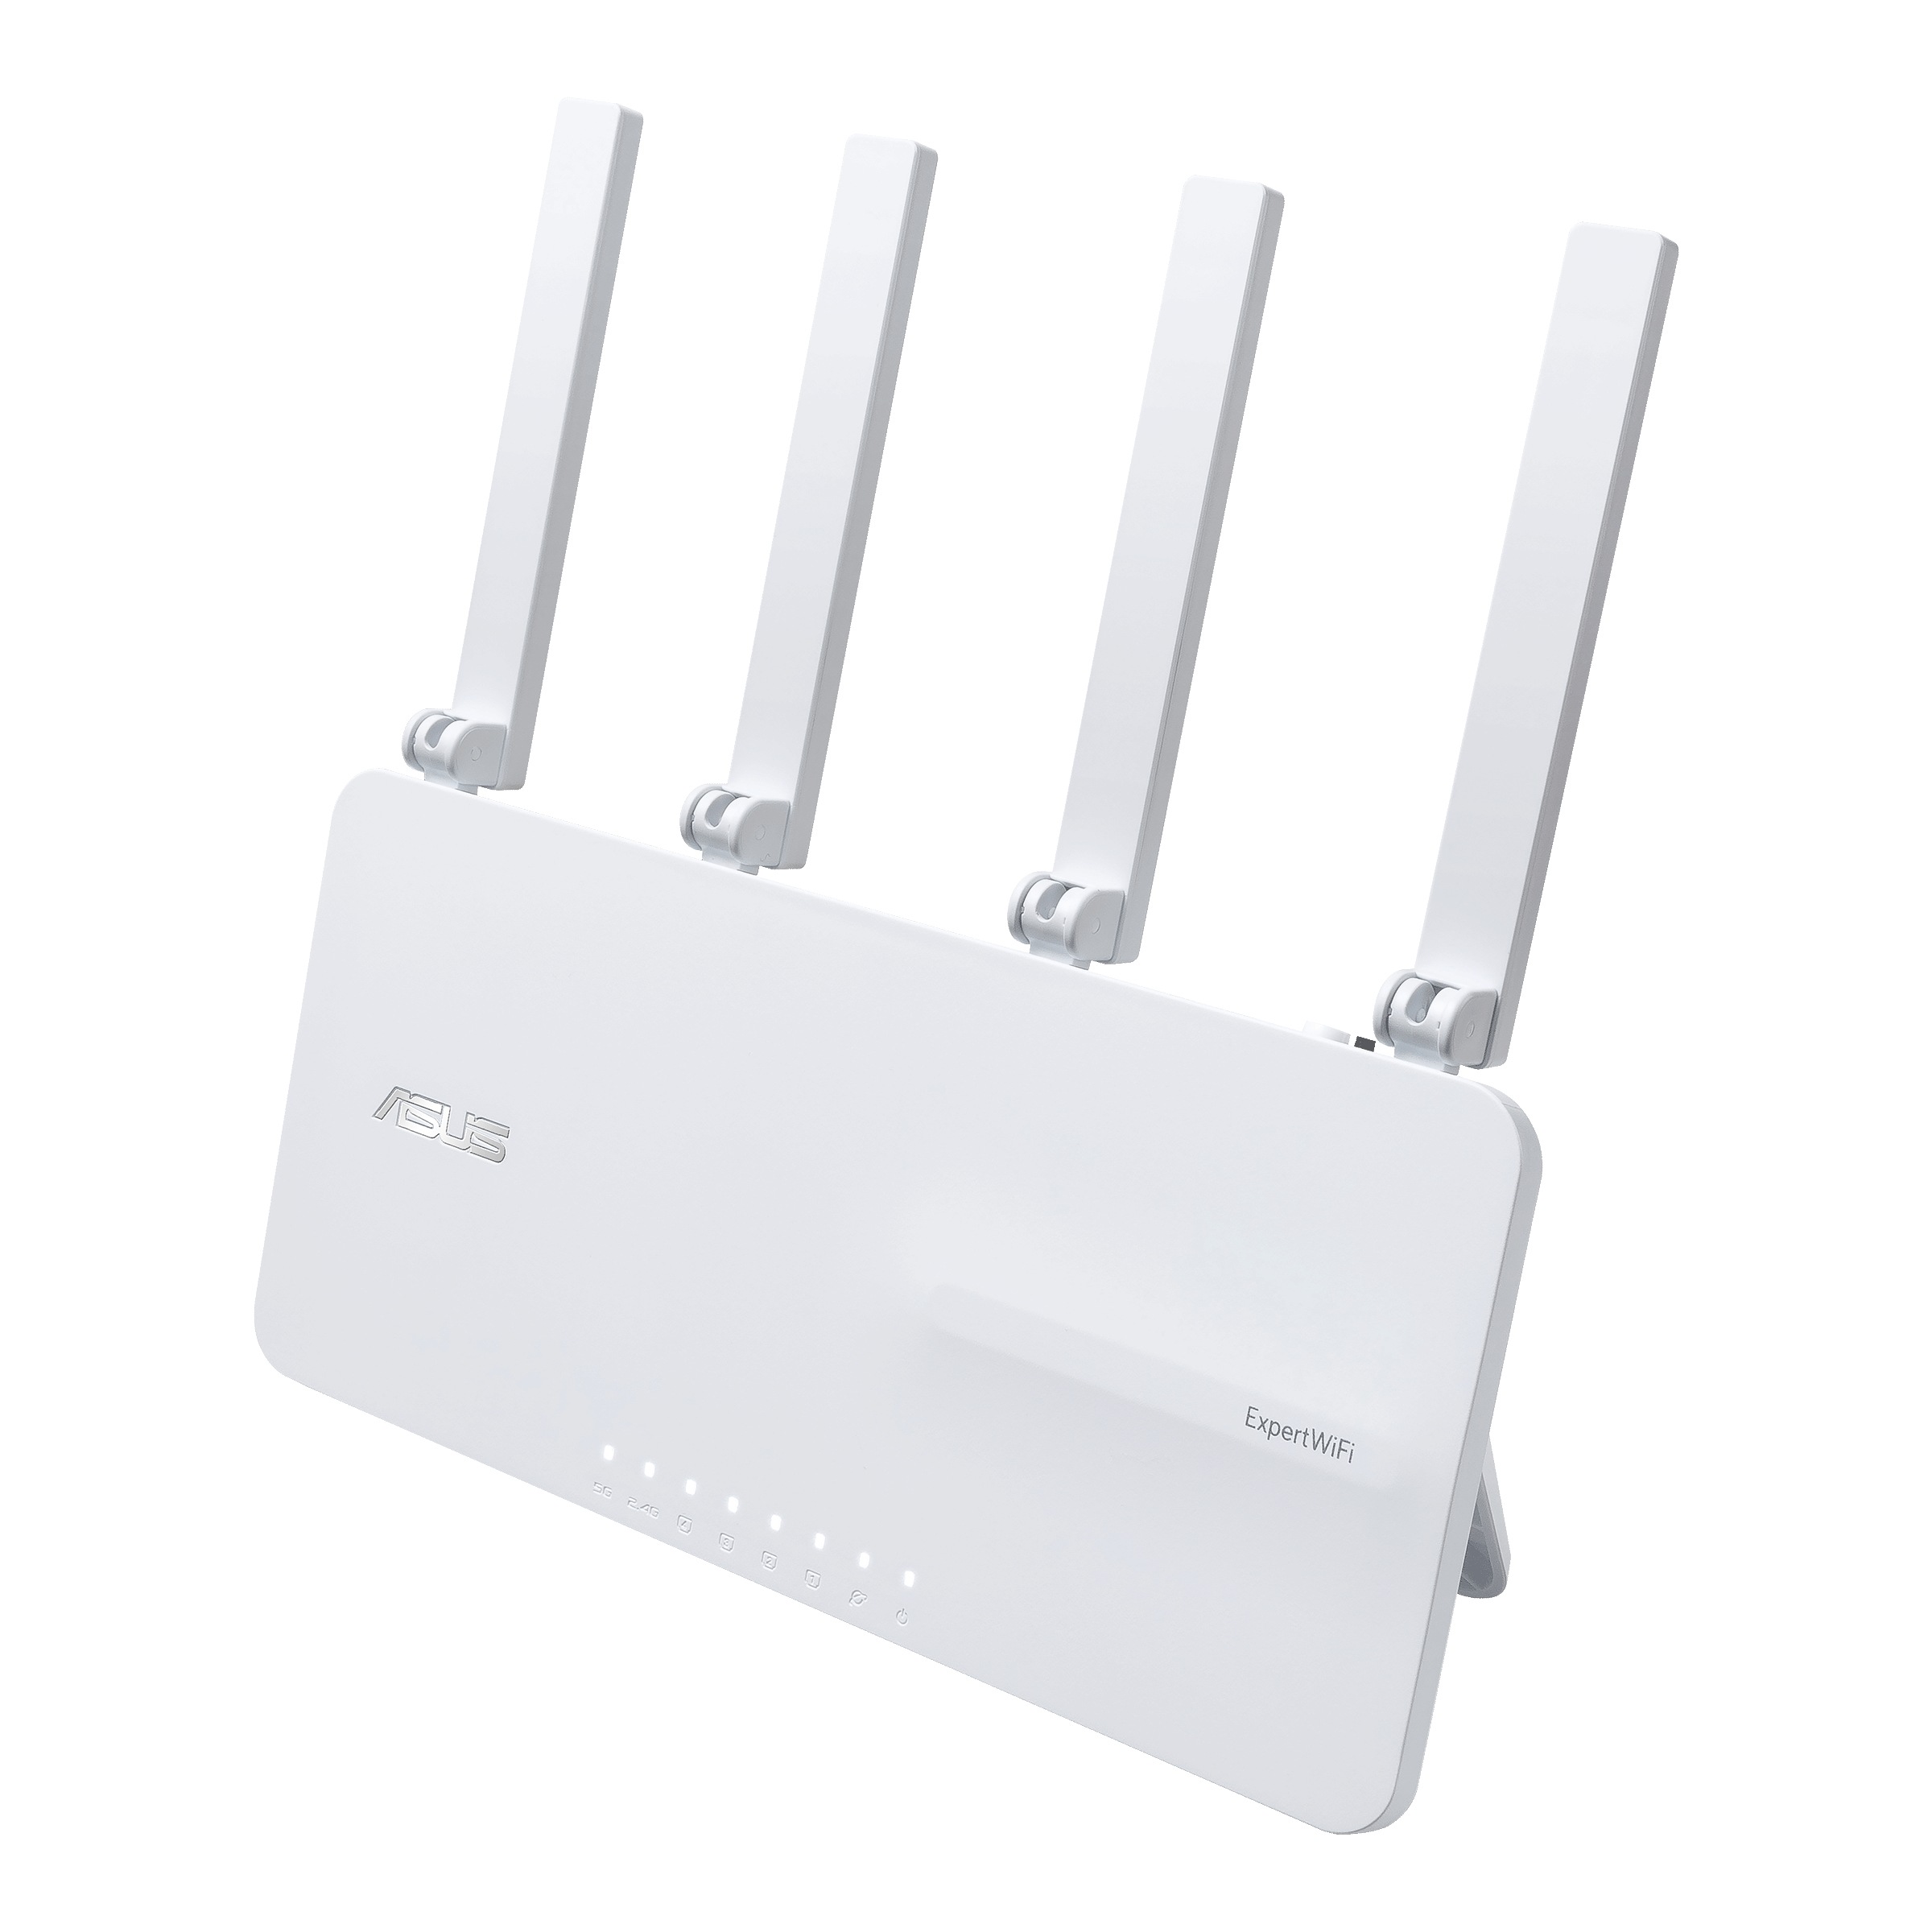 Asus WLAN-Router »Router Asus Expert WiFi EBR63 White«